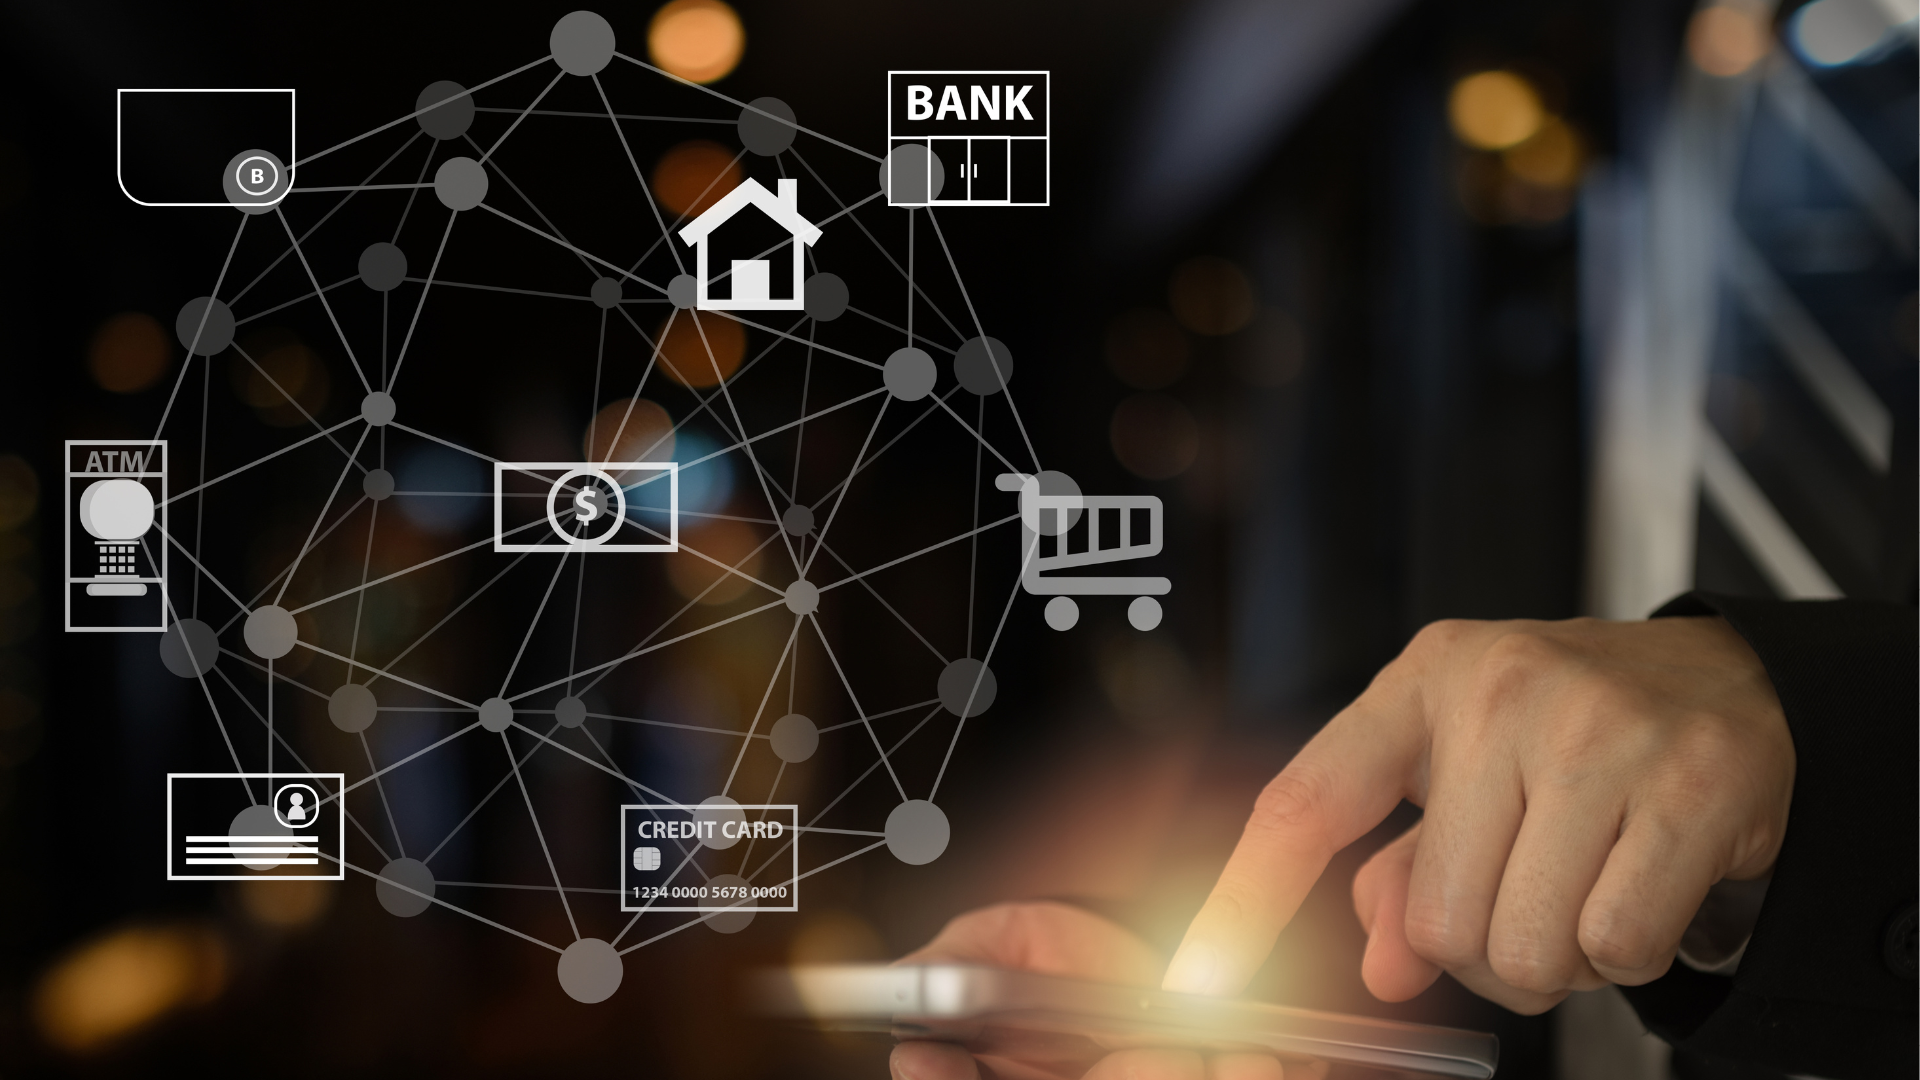 latest blog post on the 24/7 Availability of digital banking channels